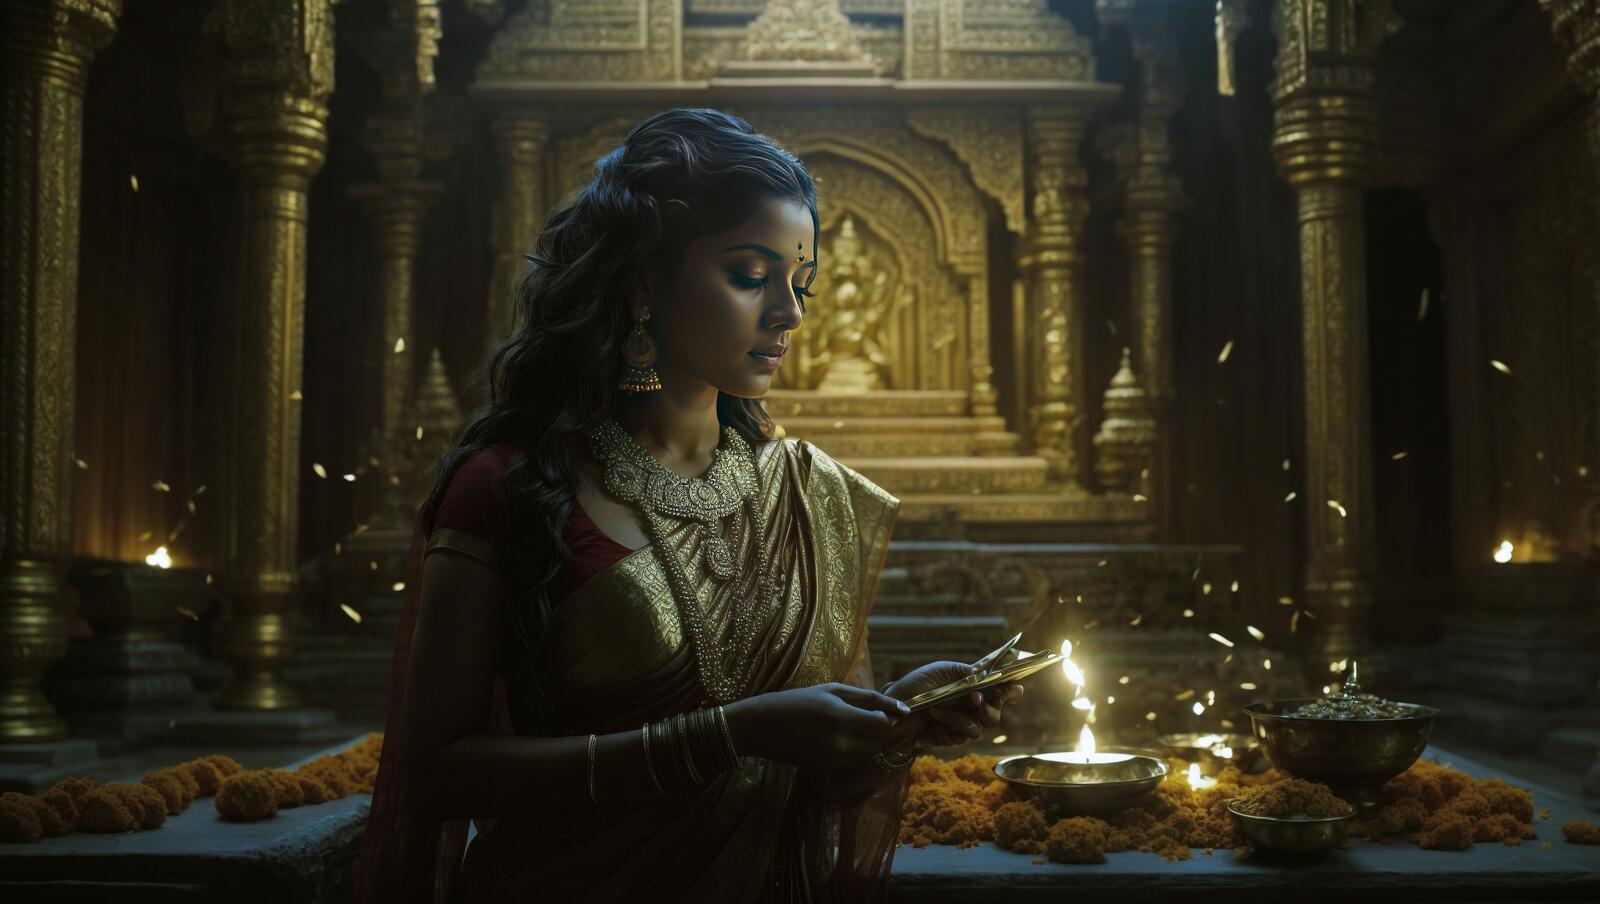 Free photo A woman in a golden saree holding a lit candle